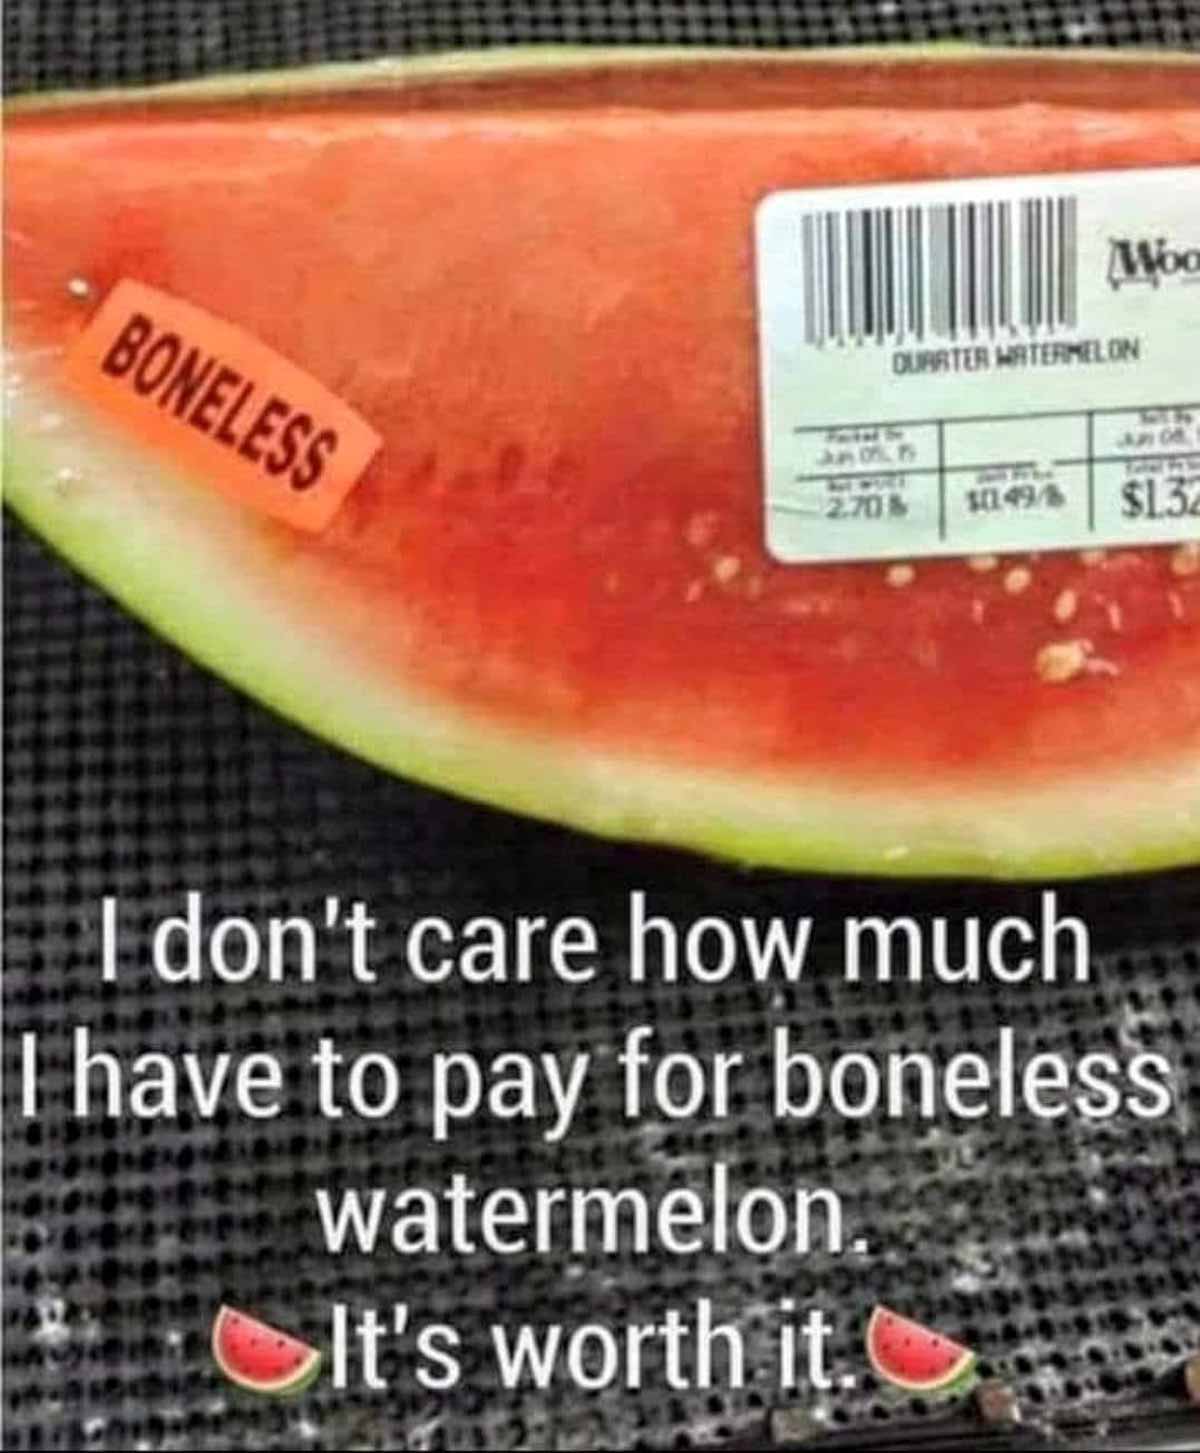 Picture of a watermelon with a grocery store sticker that says 'boneless' and the text says 'i don't care how much i have to pay for boneless watermelon, it's worth it.'